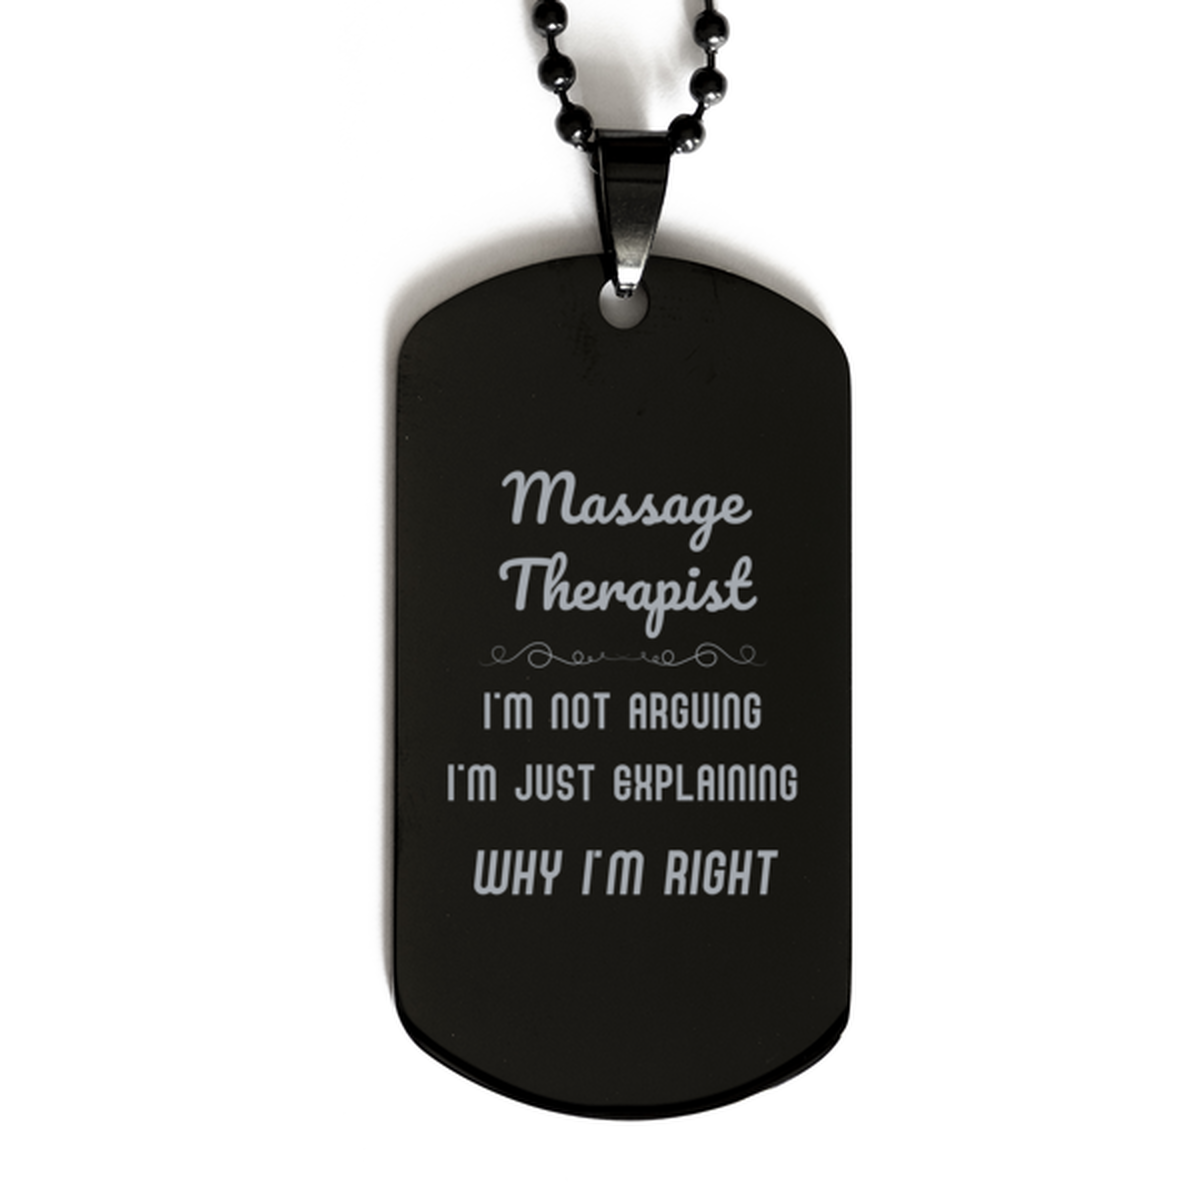 Massage Therapist I'm not Arguing. I'm Just Explaining Why I'm RIGHT Black Dog Tag, Funny Saying Quote Massage Therapist Gifts For Massage Therapist Graduation Birthday Christmas Gifts for Men Women Coworker